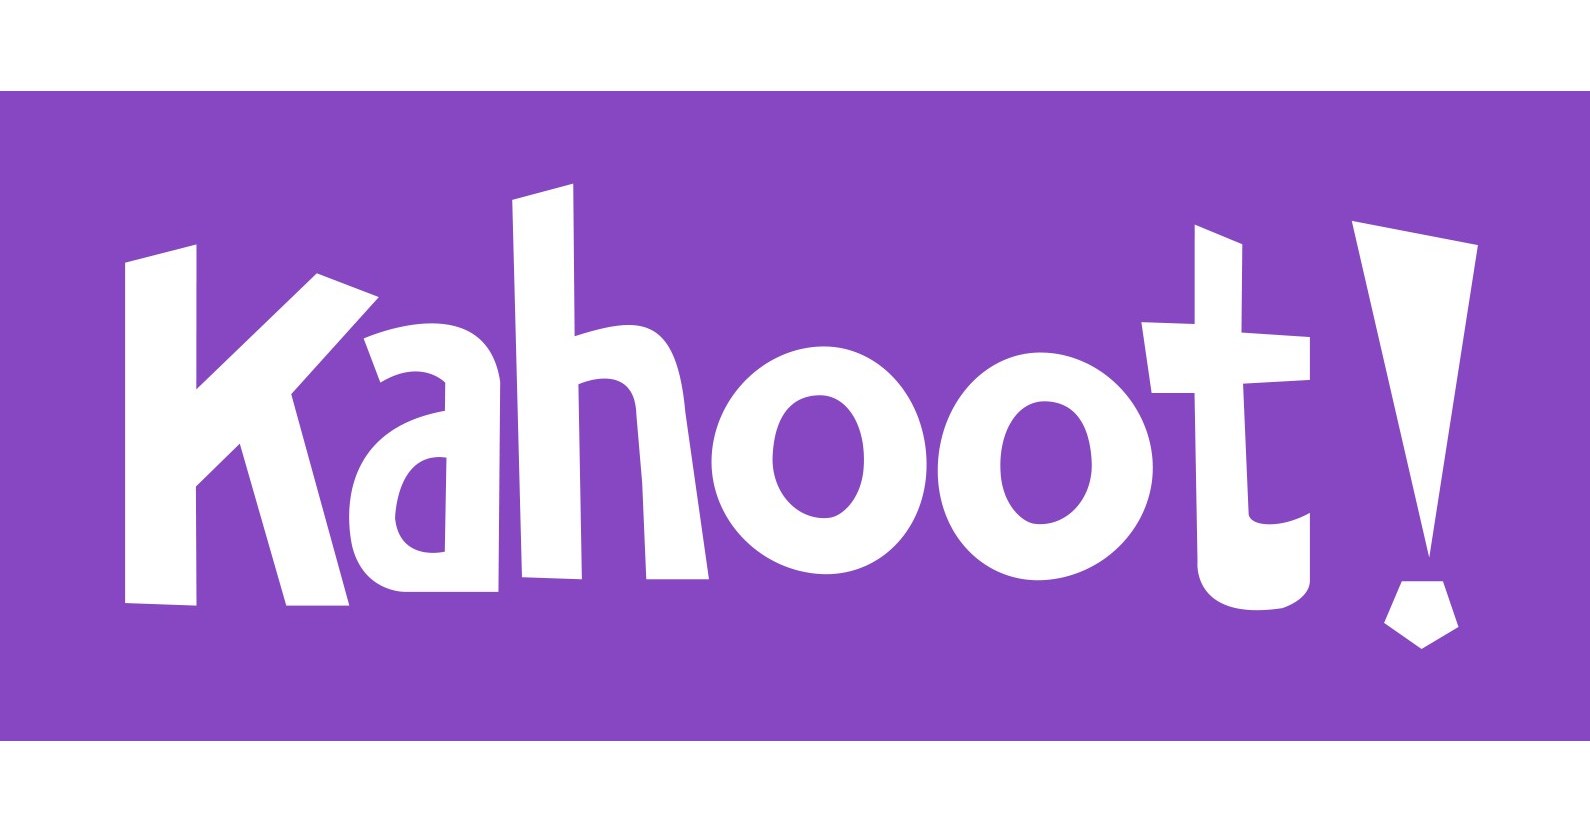 Kahoot Launches In App Quiz Creation And Hosting Tools To Turn